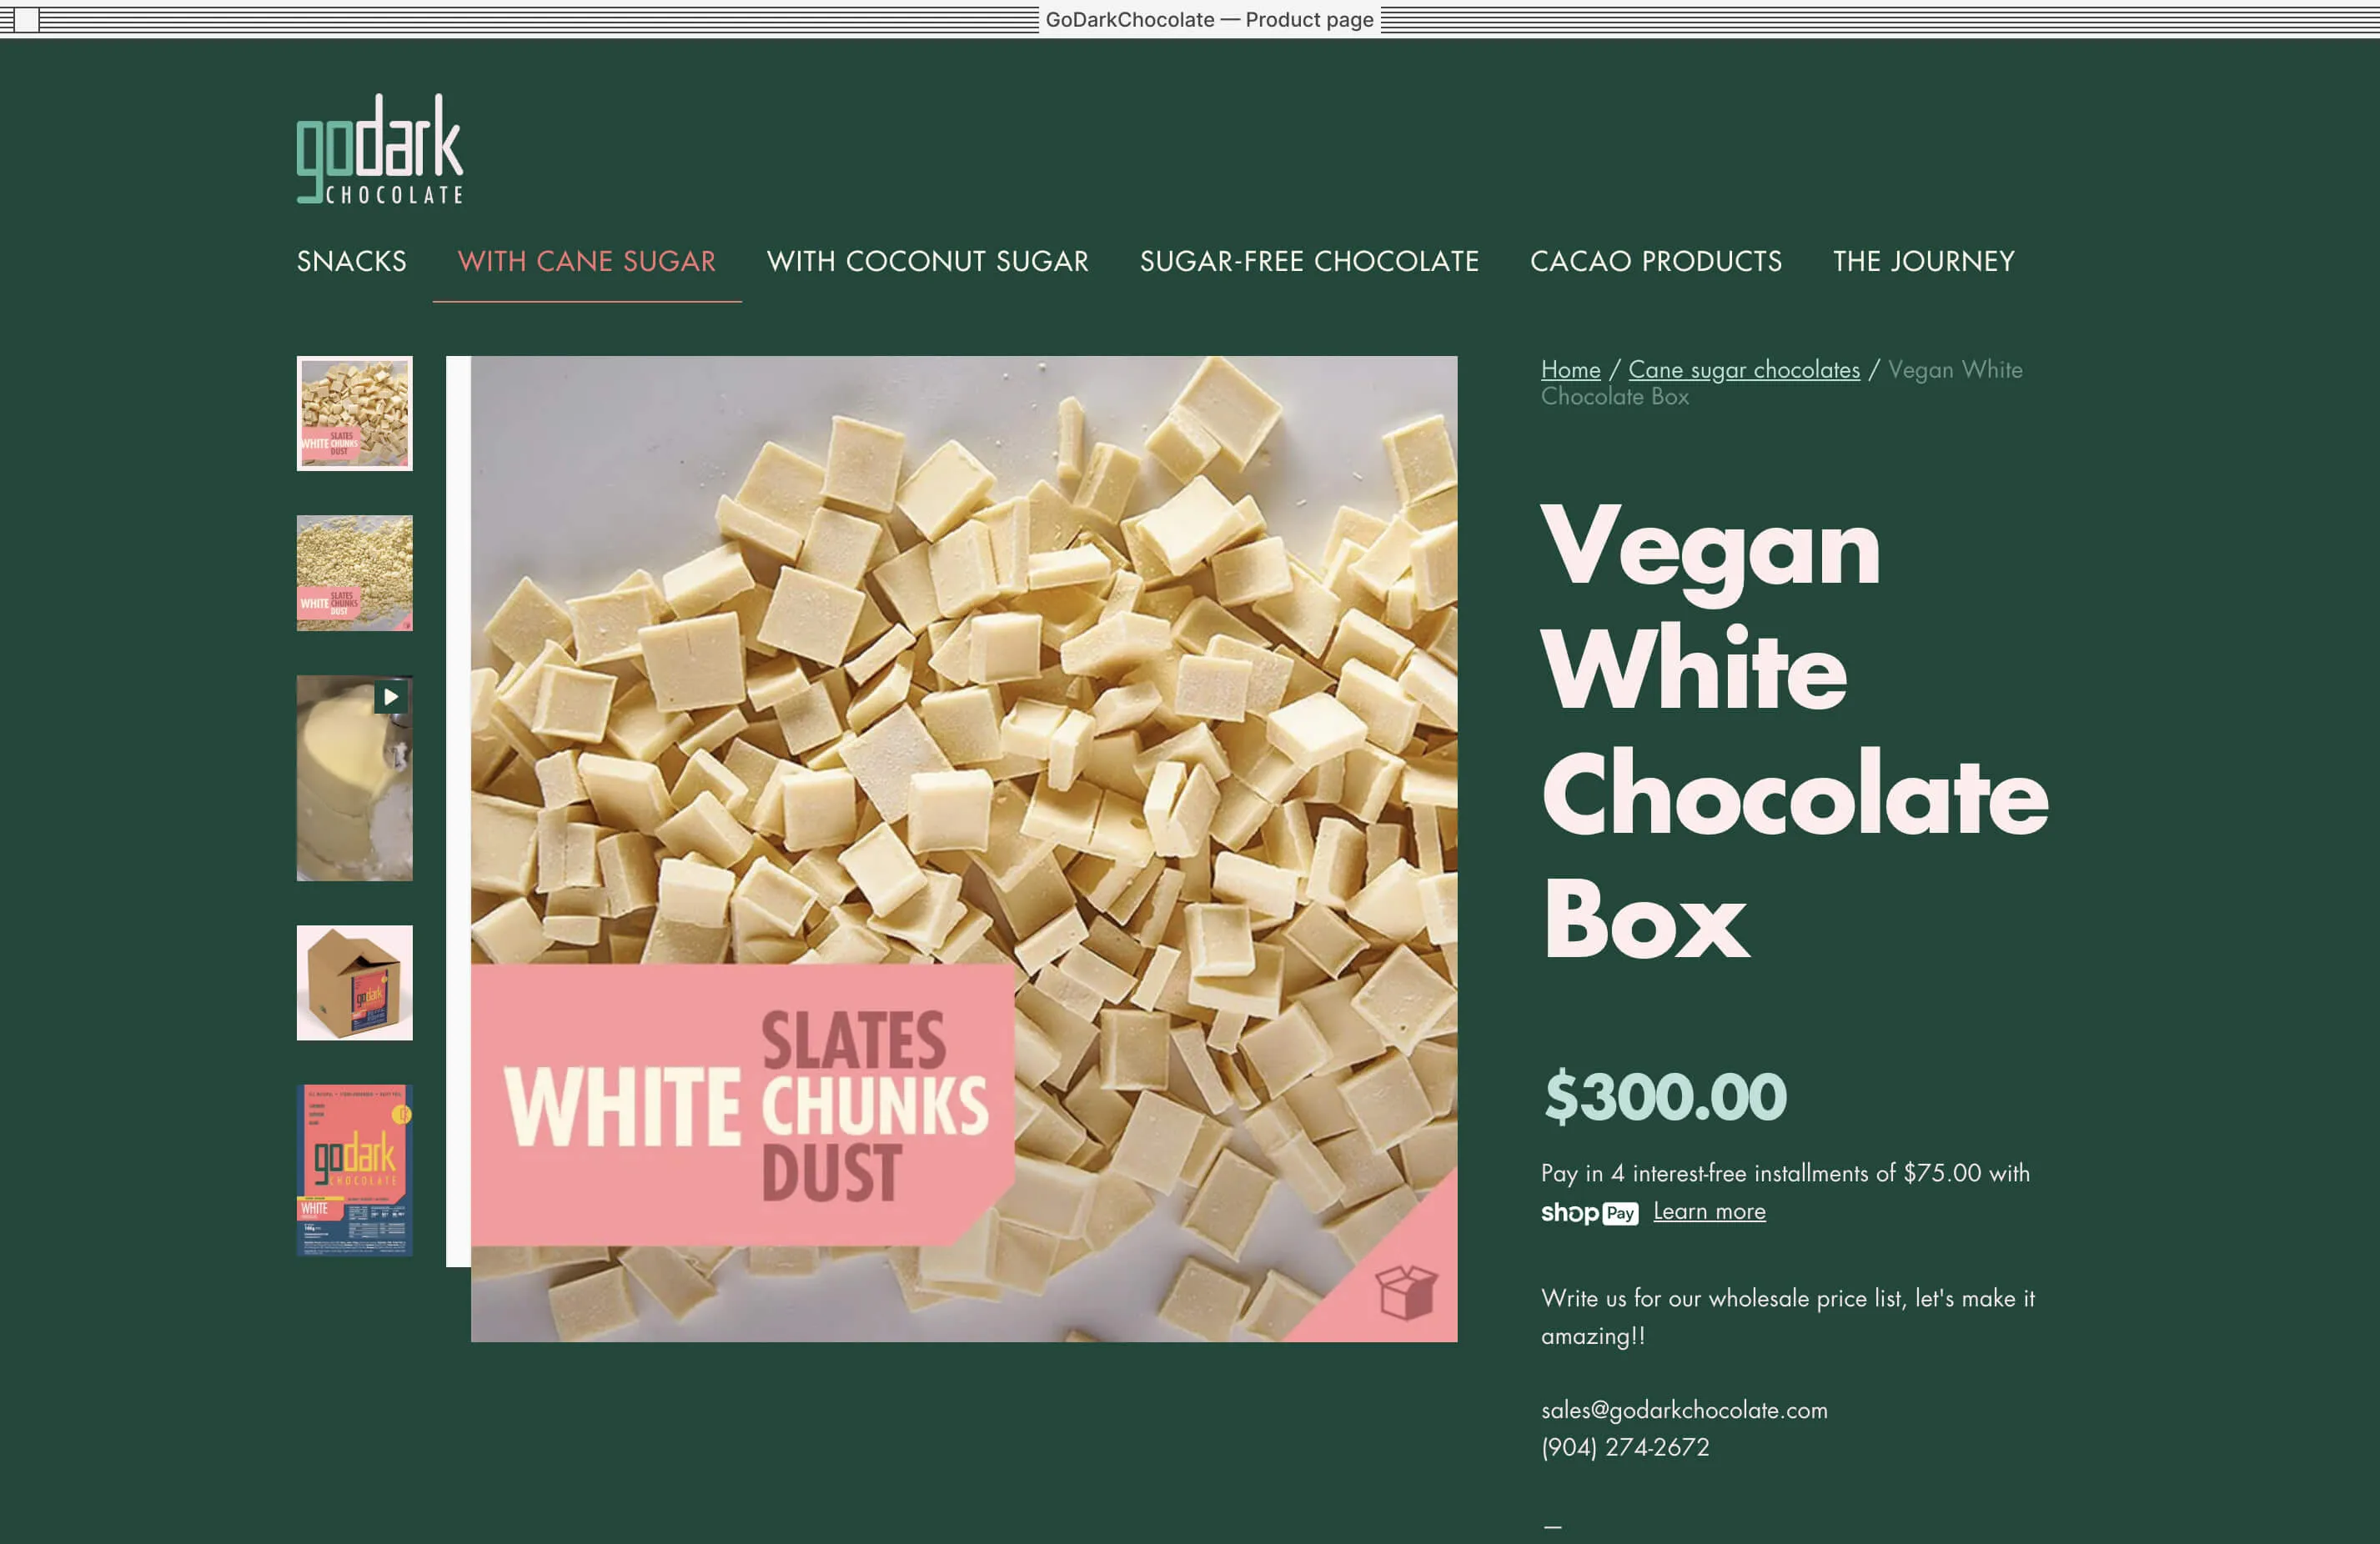 Vegan white chocolate product page showing products and prices